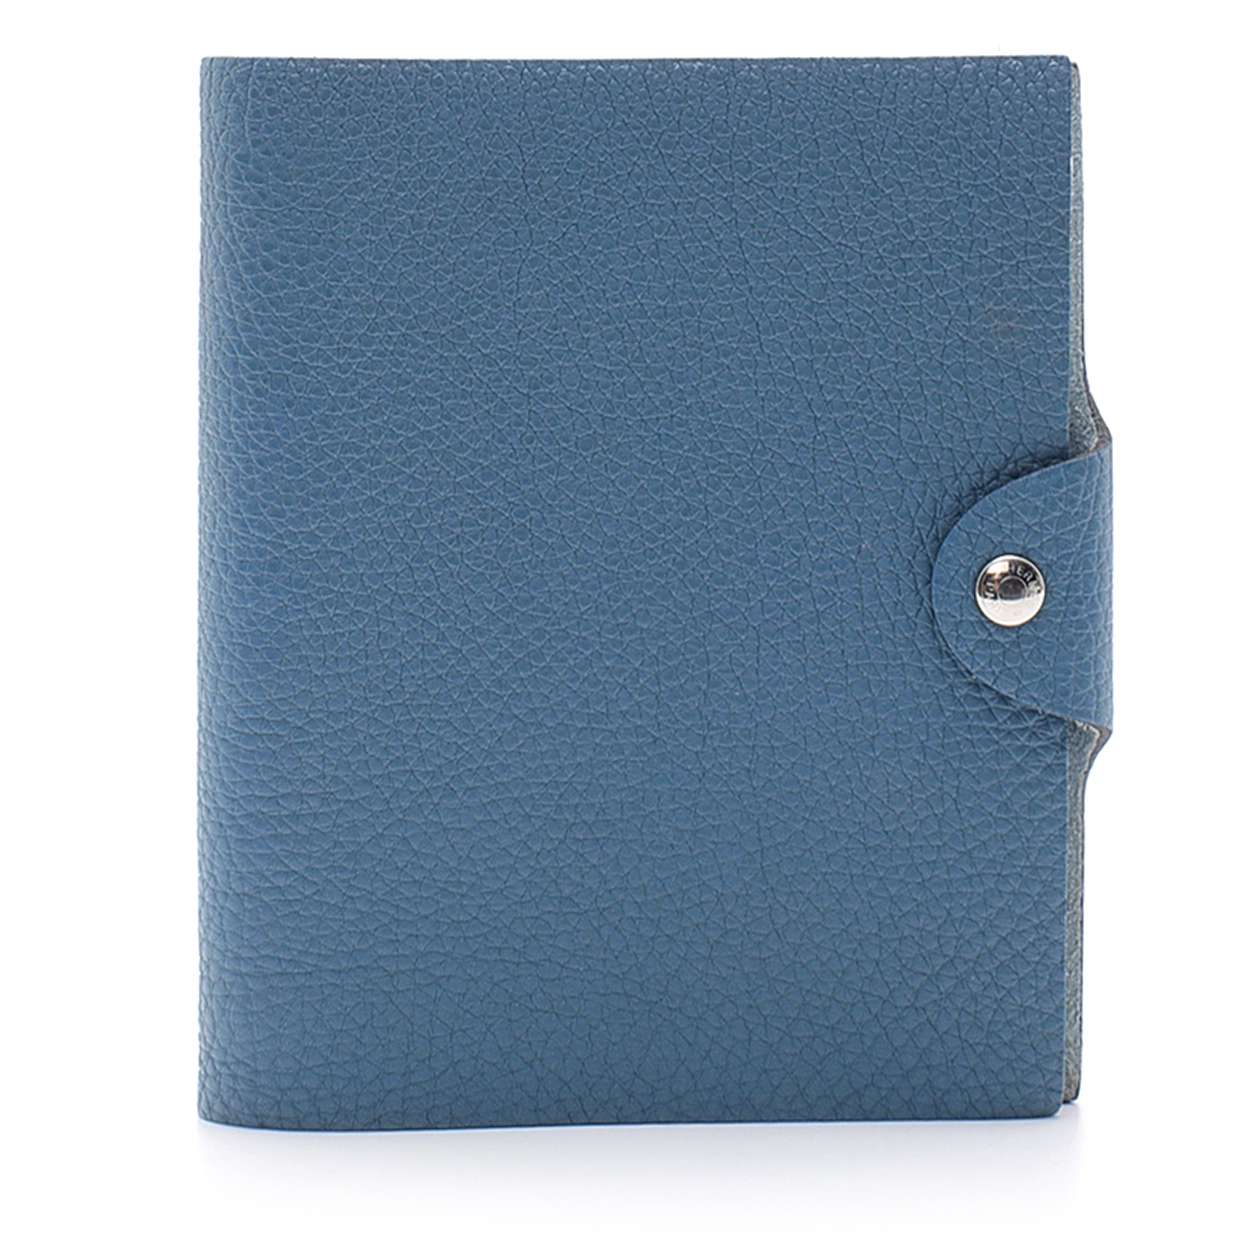 Hermes - Baby Blue Togo Leather Ulysse Agenda and Notebook Cover